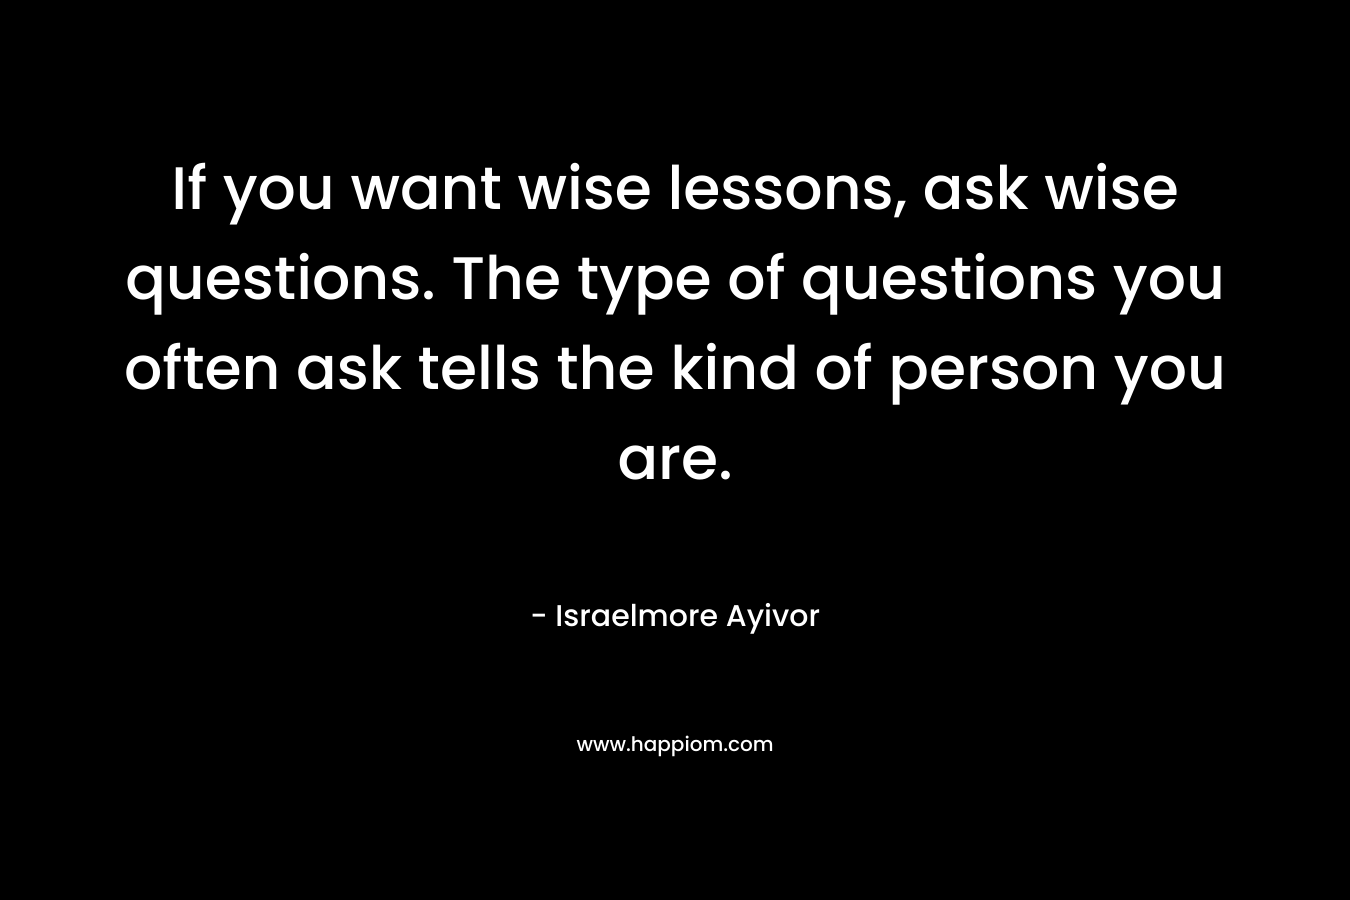 If you want wise lessons, ask wise questions. The type of questions you often ask tells the kind of person you are.